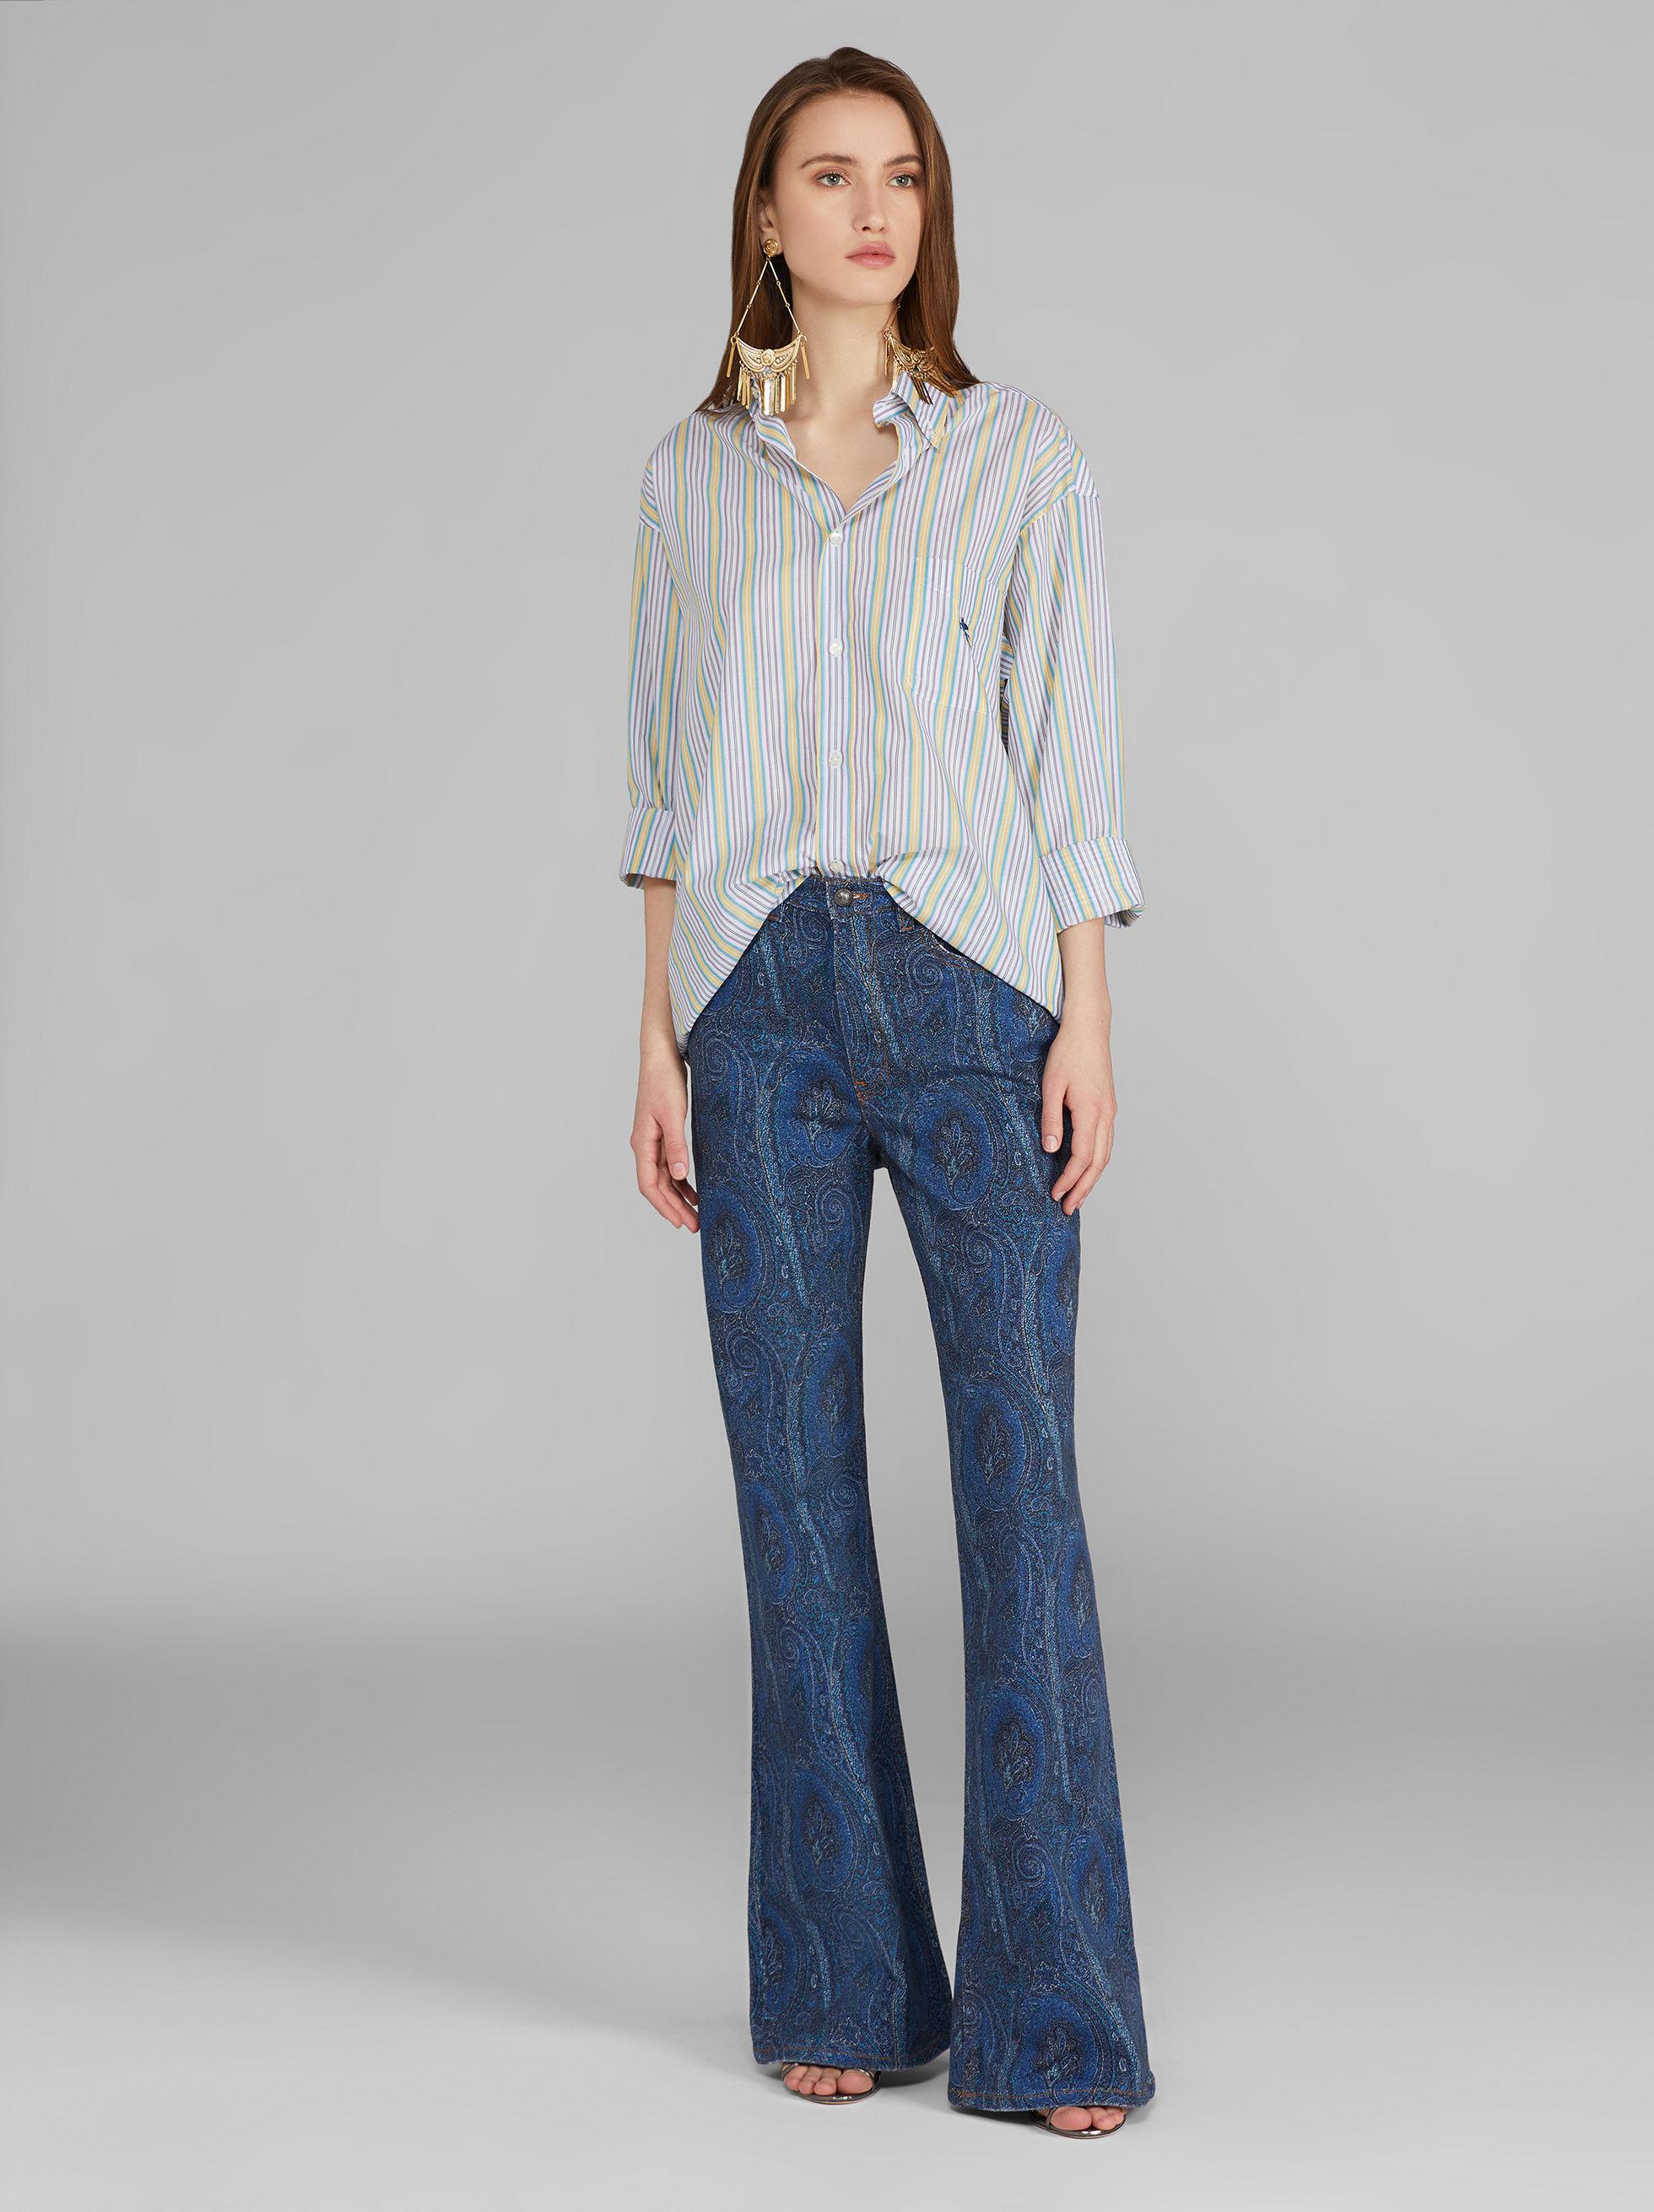 Etro Denim Flared Jeans With Paisley Print in Navy Blue (Blue) - Lyst